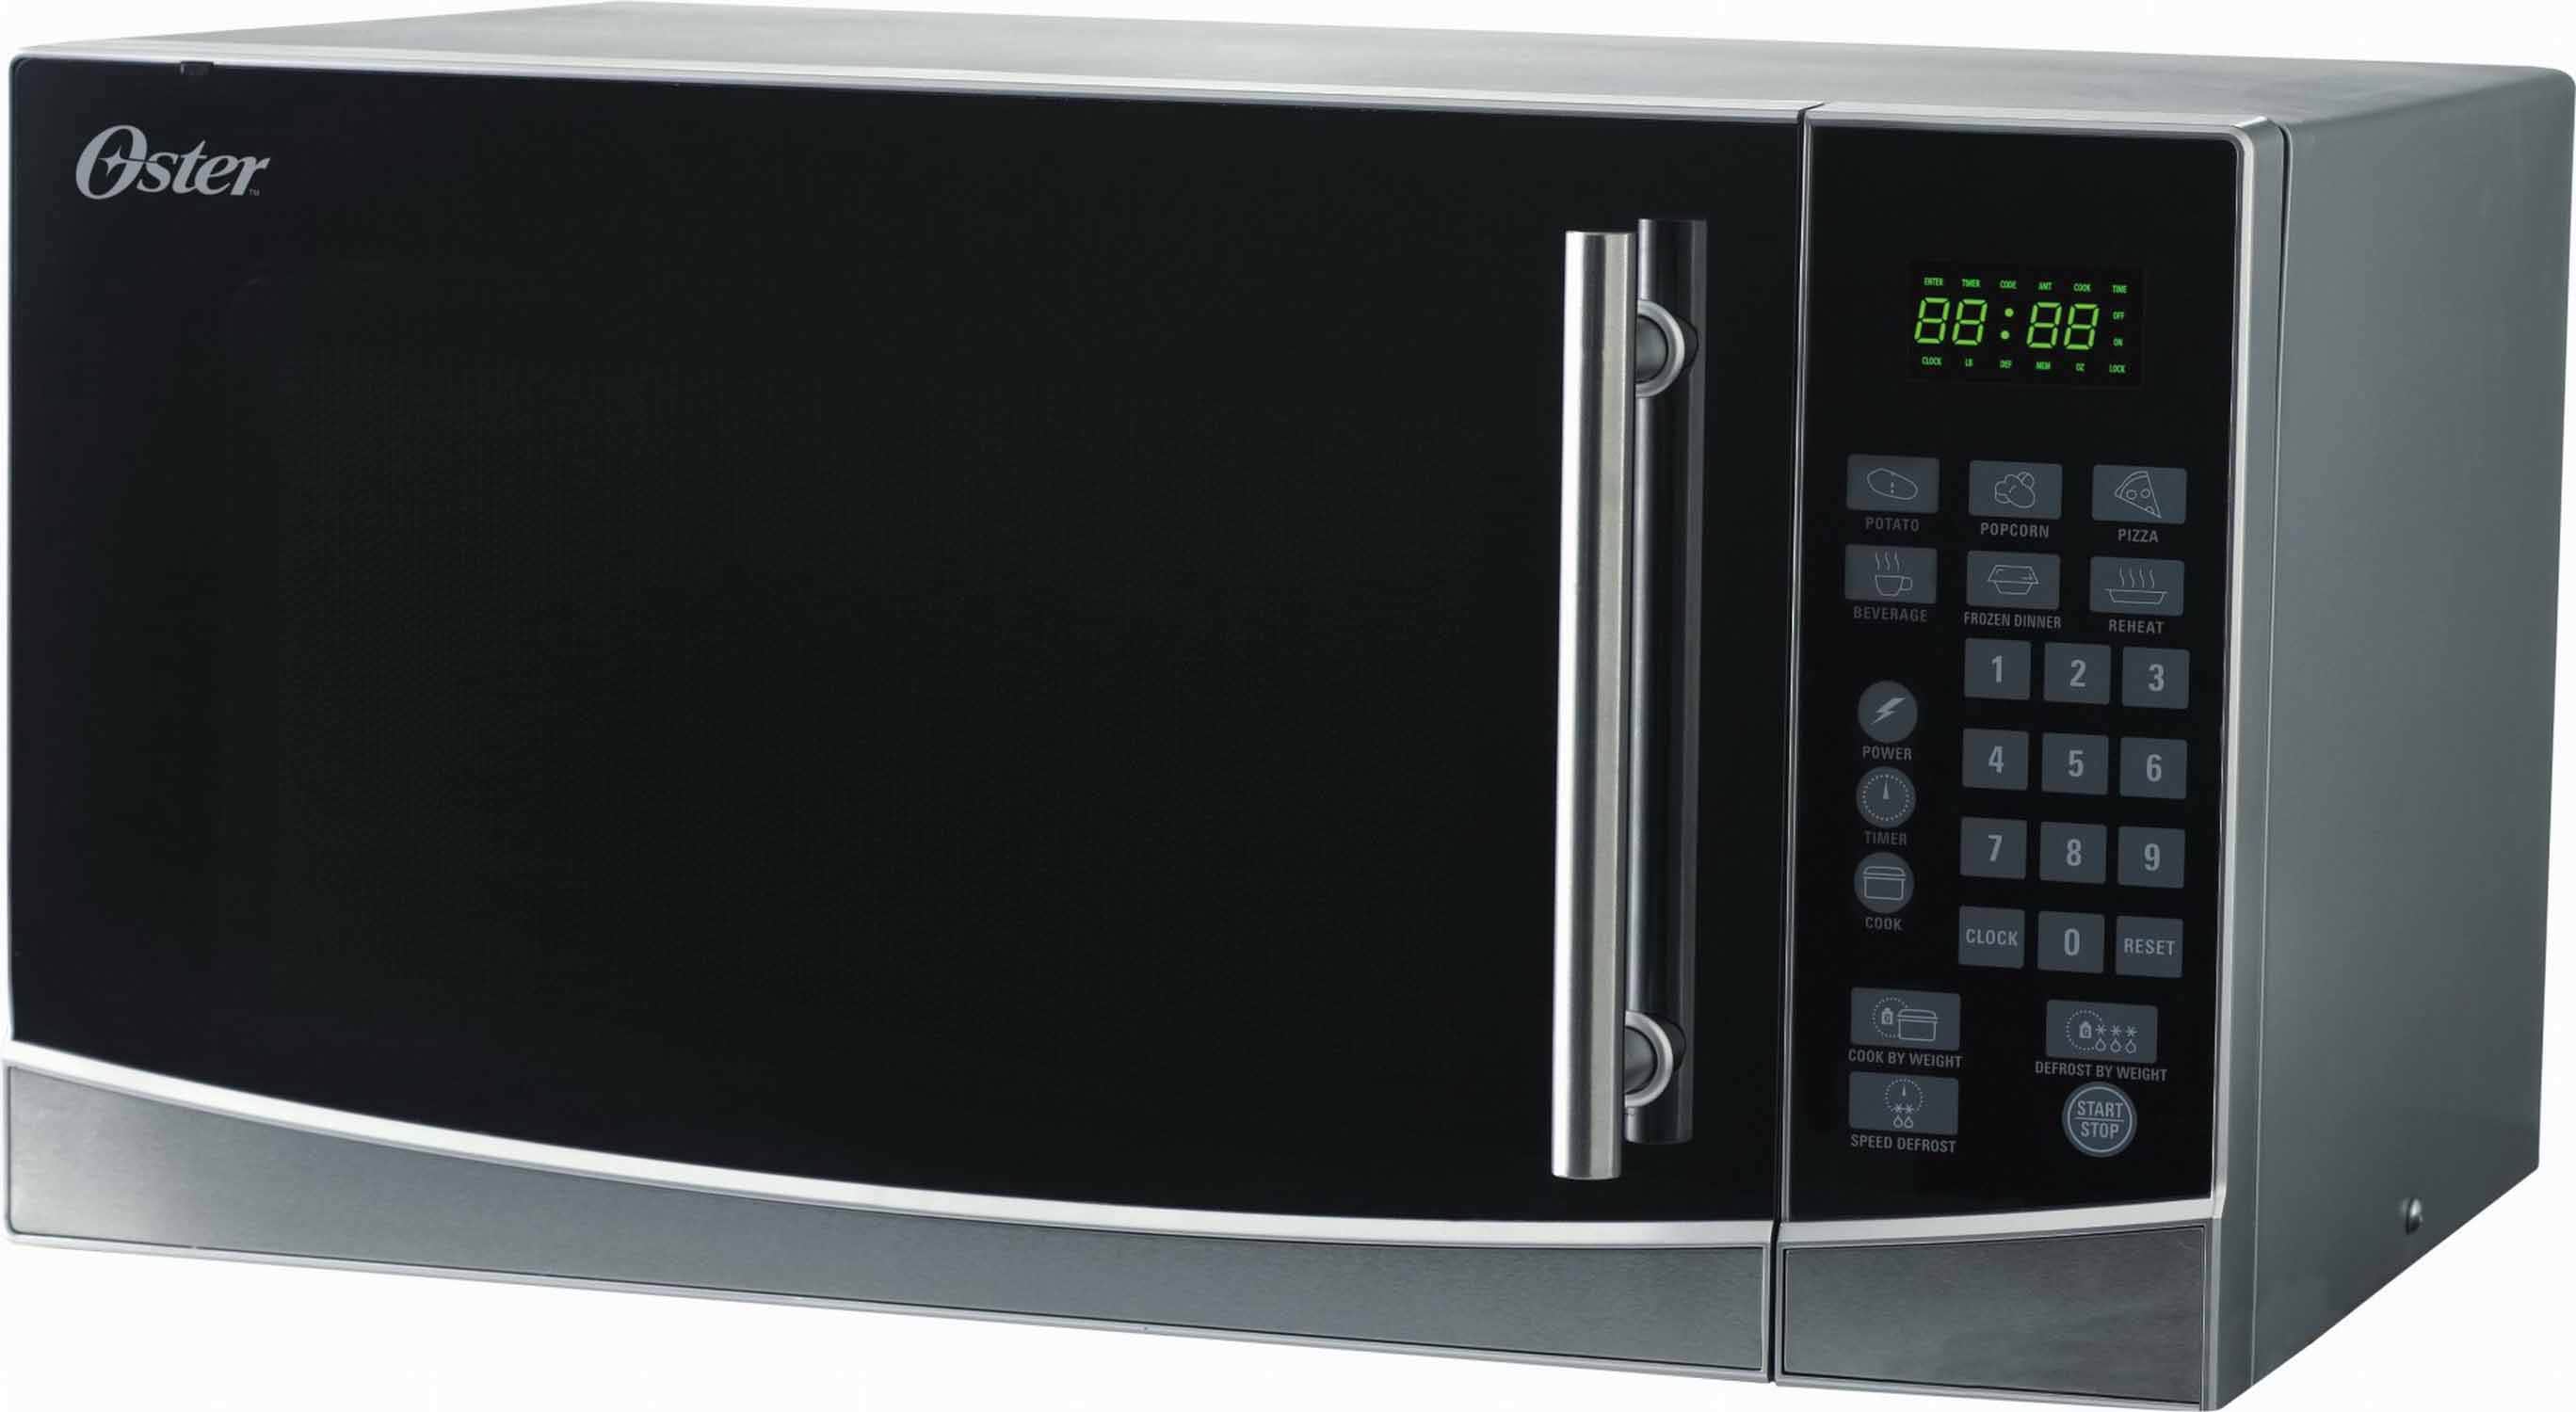 Offers on Oster Brand Microwave Oven With Air Fryer